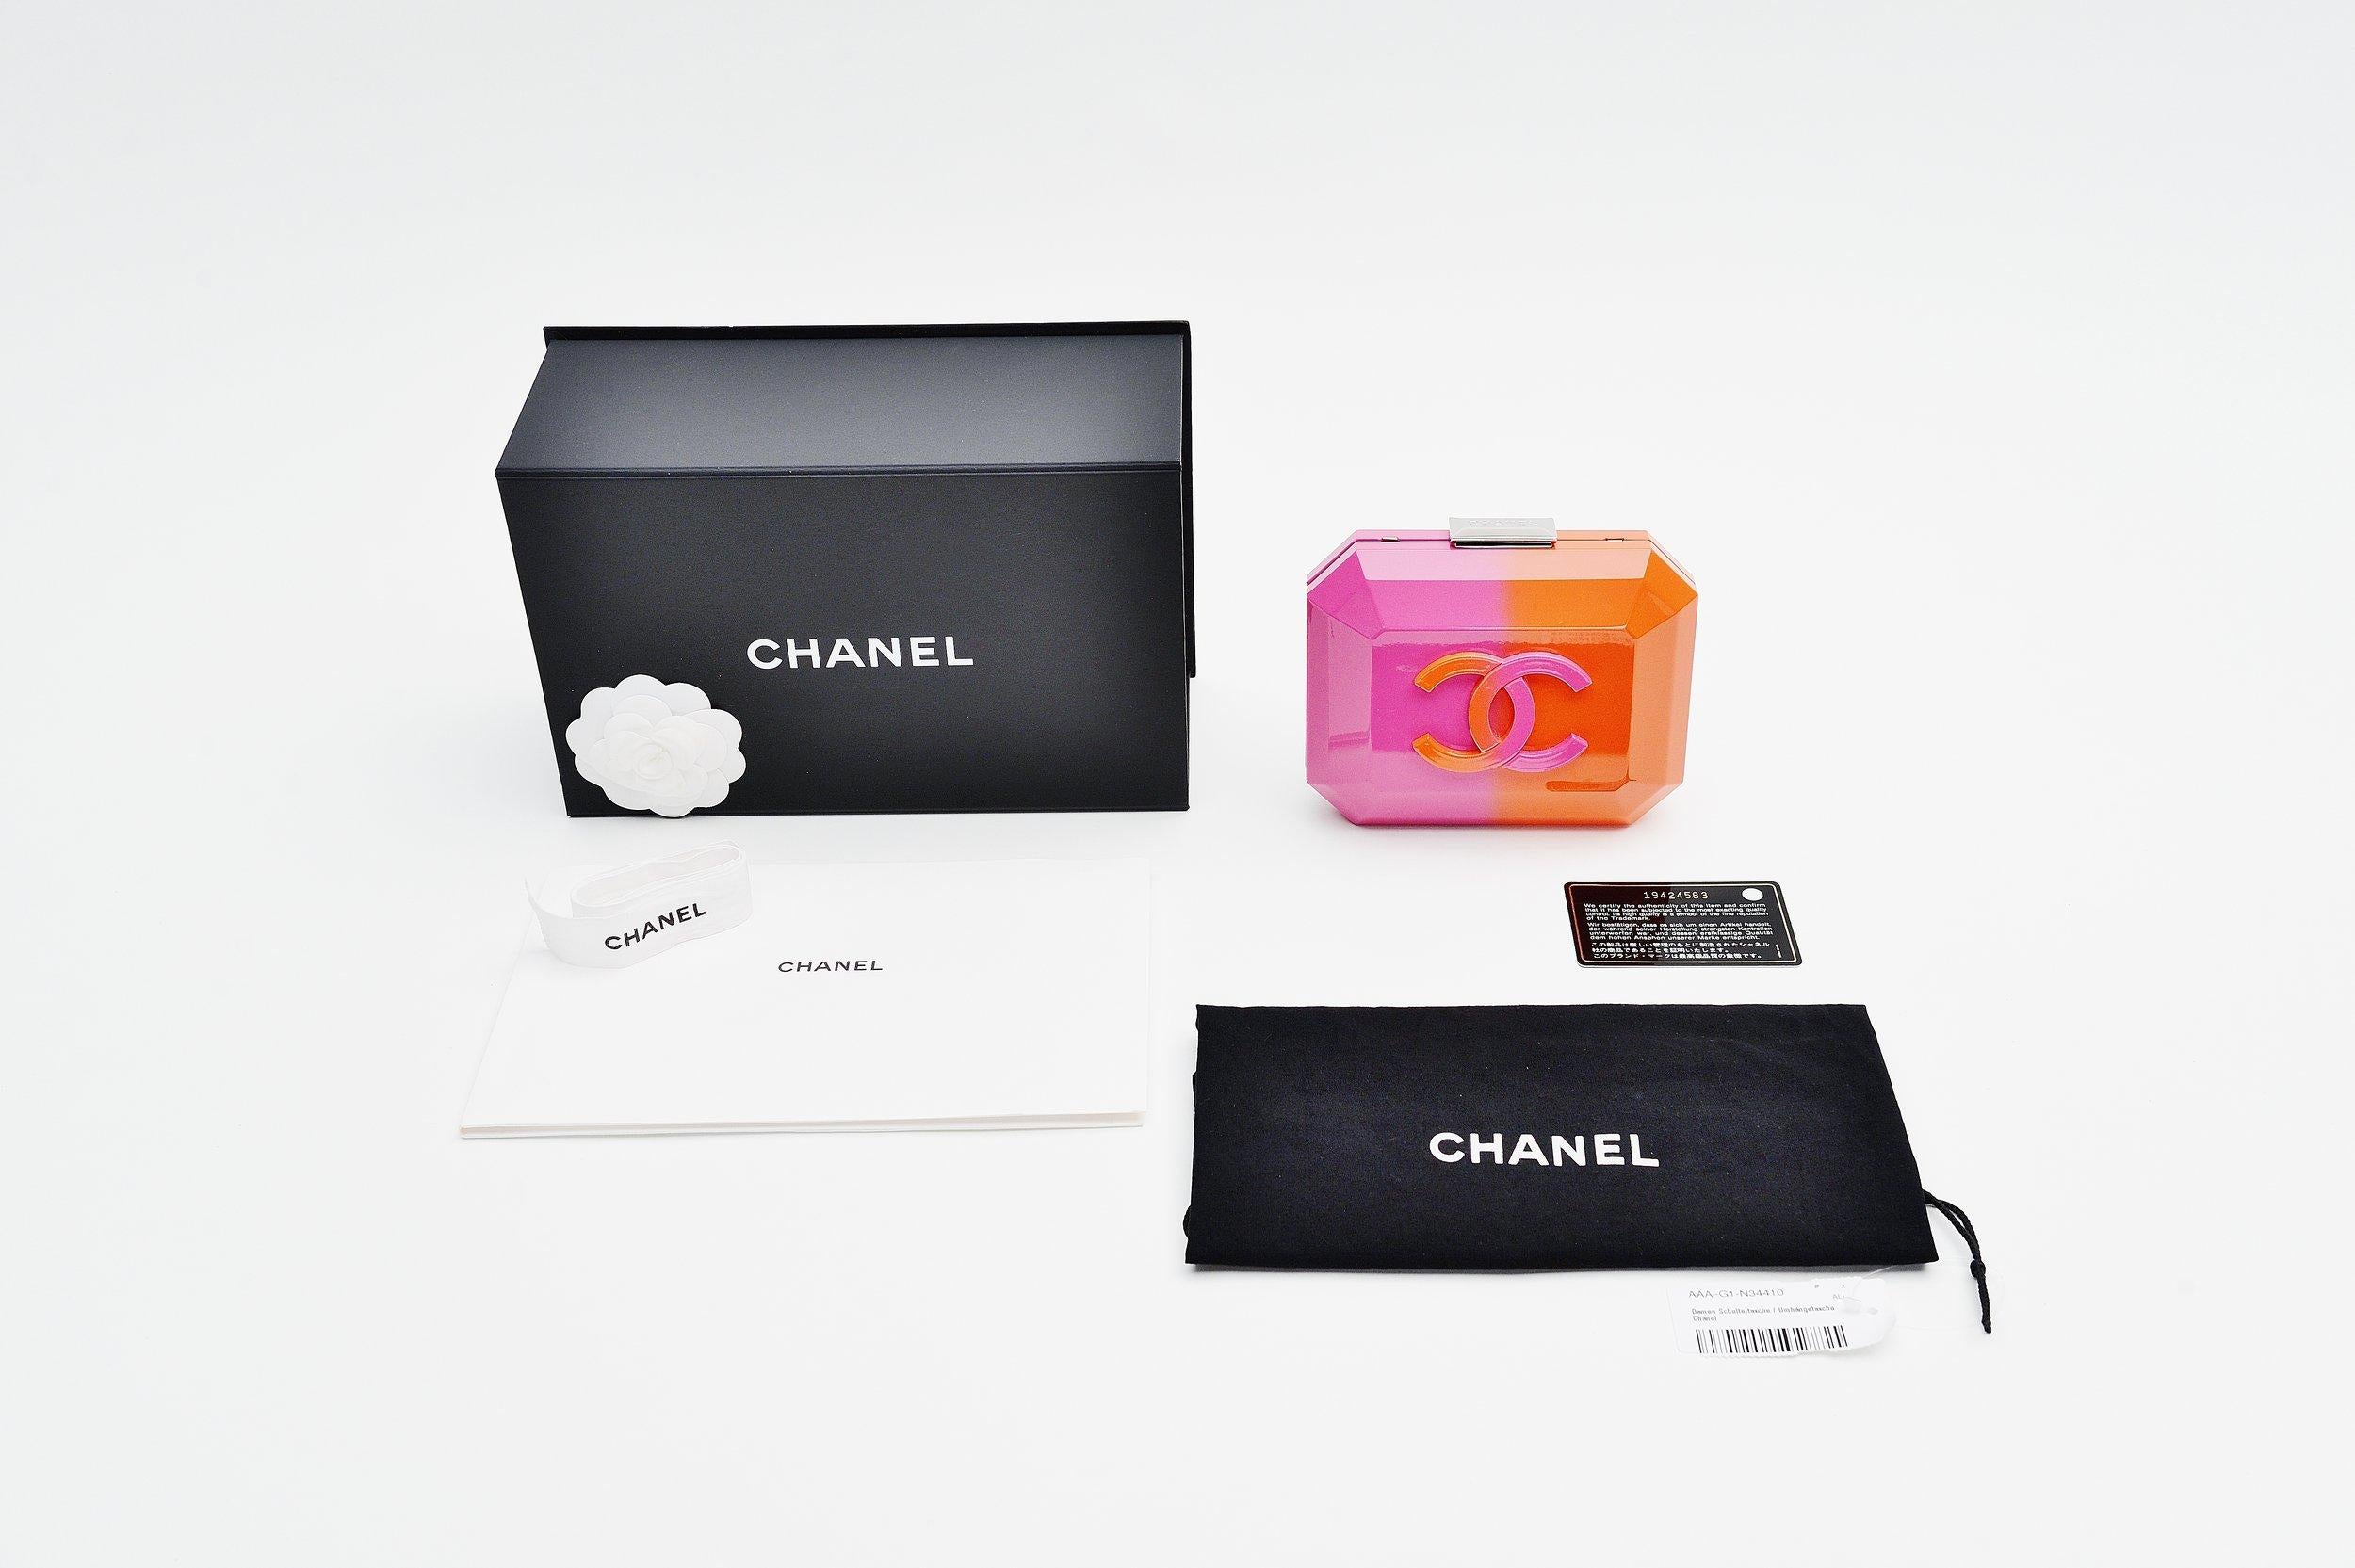 From the collection of Savineti we offer this rare runway Chanel Minaudière handbag/clutch:
-	Brand: Chanel
-	Model: Minaudière
-	Year: 2014
-	Code: 19424583
-	Condition: very good 
-	Materials: durable plexiglass, leather, silver hardware